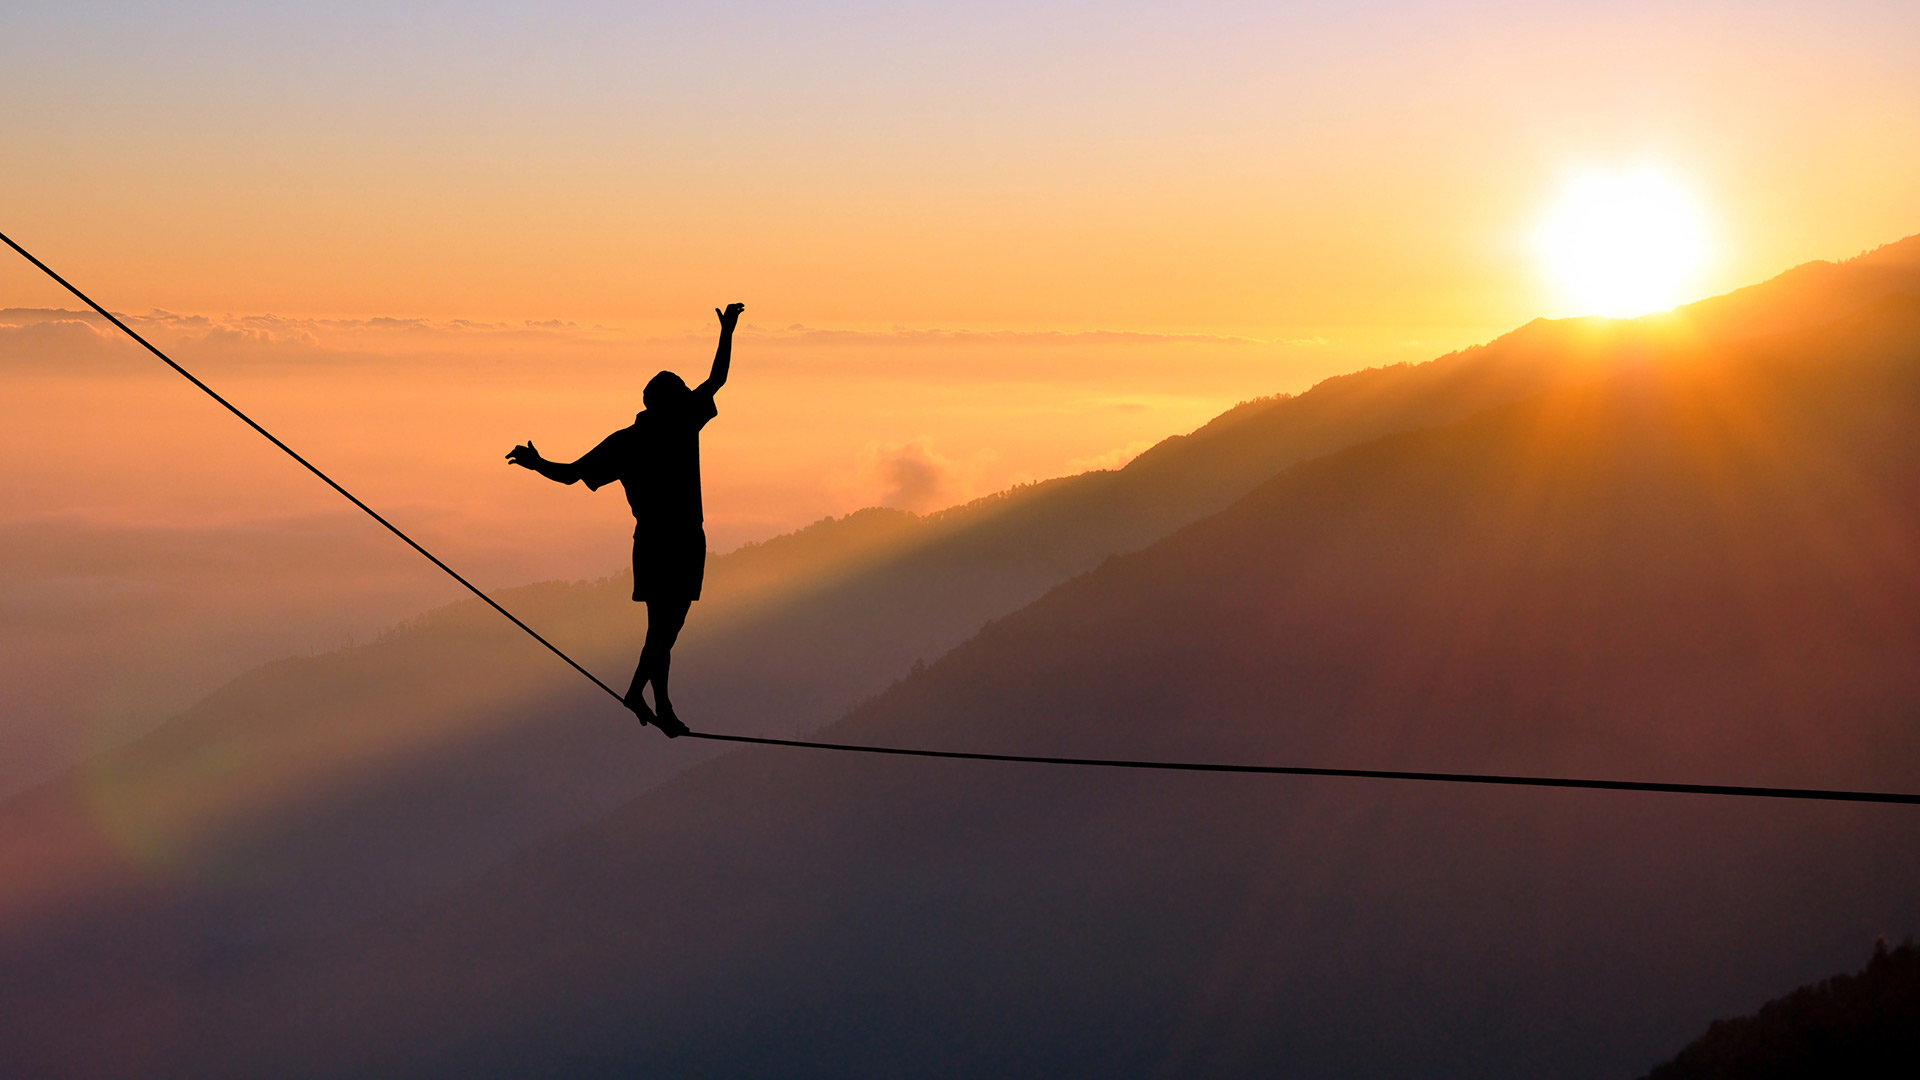 Person balancing on a slackline during sunset